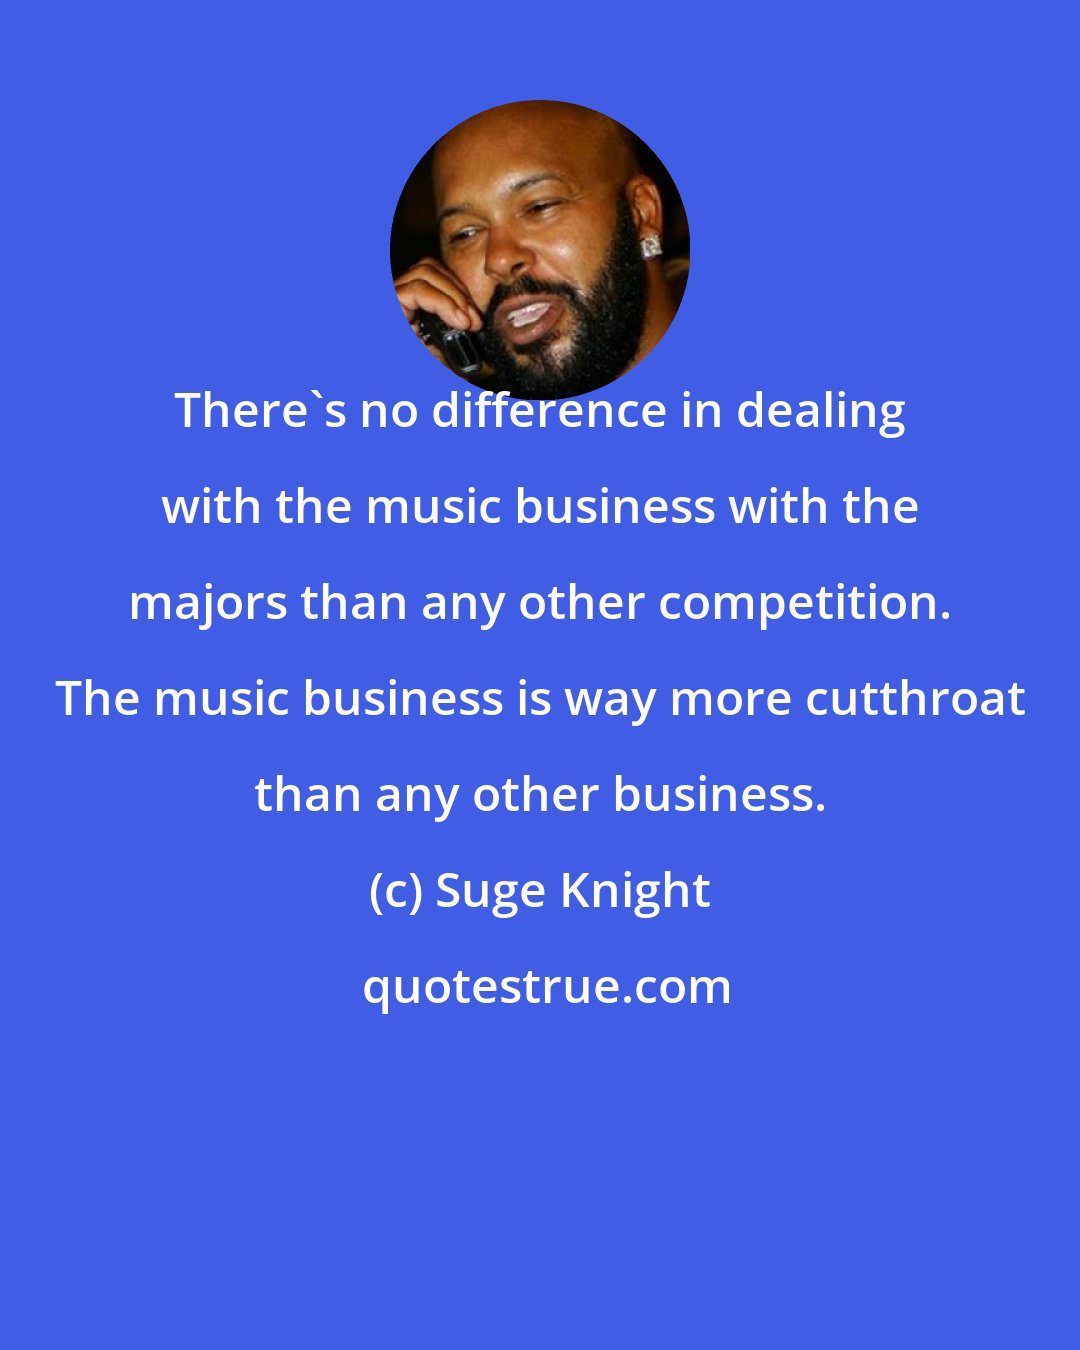 Suge Knight: There's no difference in dealing with the music business with the majors than any other competition. The music business is way more cutthroat than any other business.